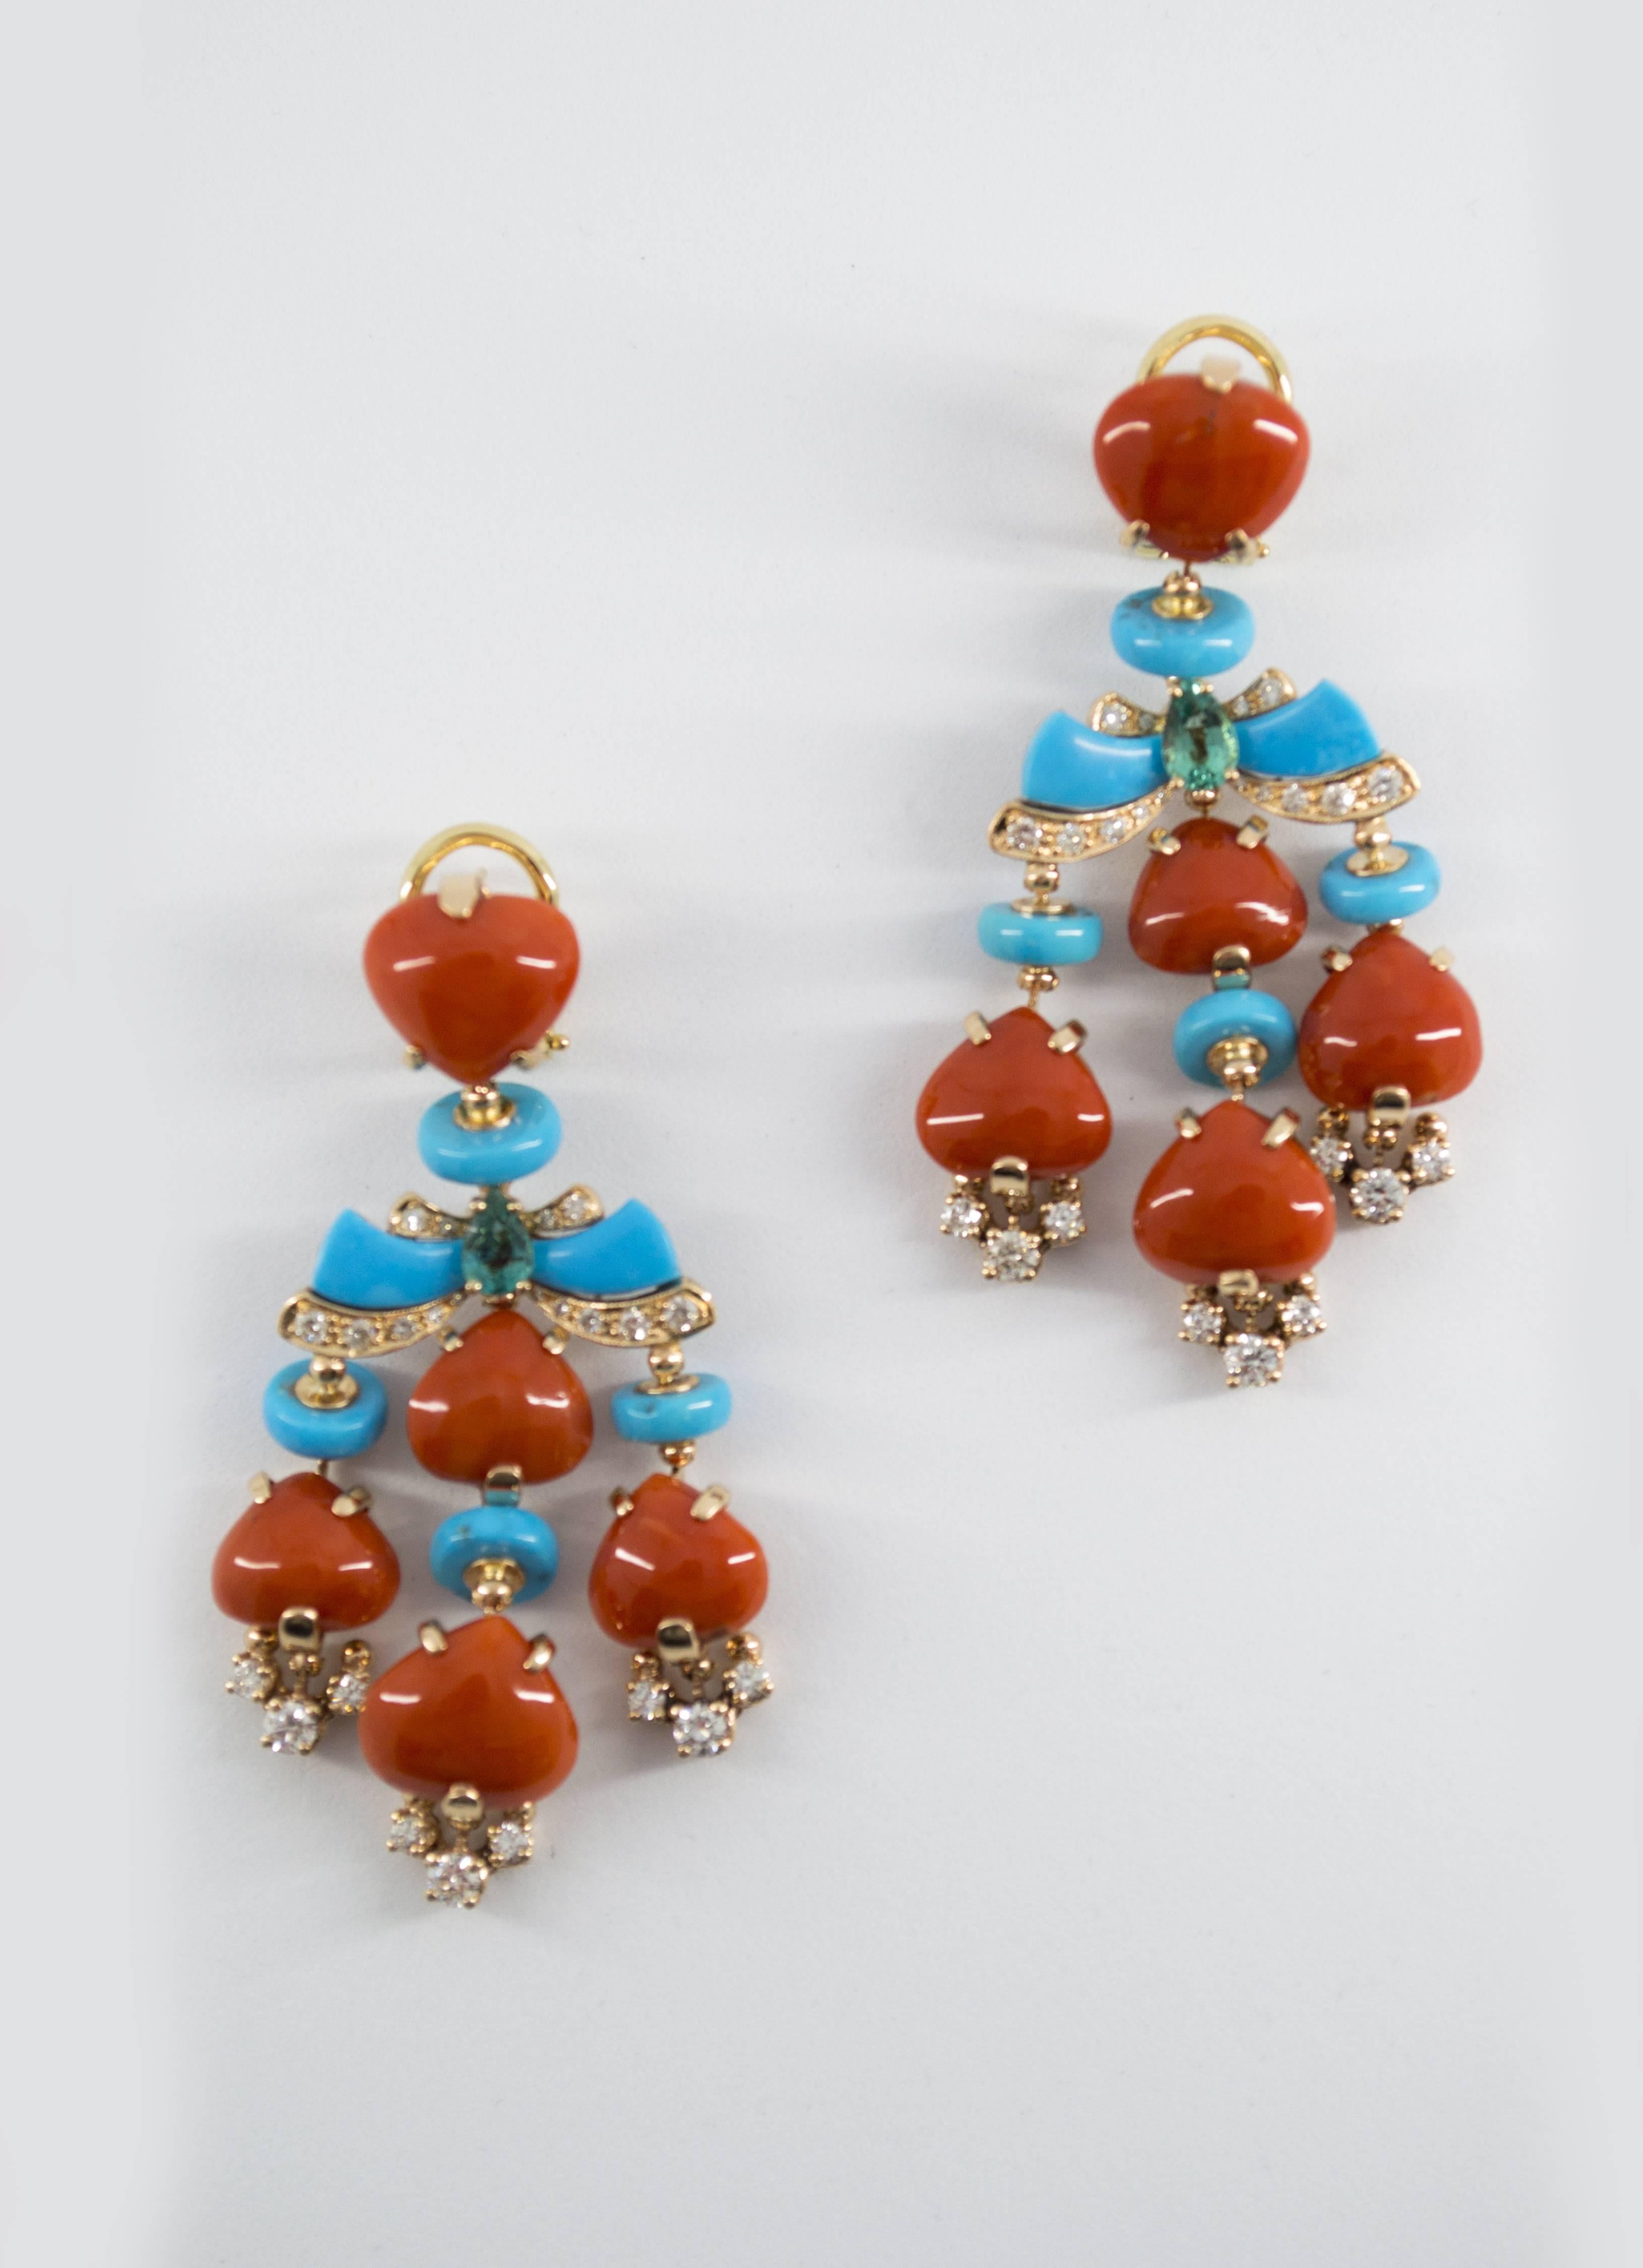 These Earrings are made of 14K Yellow Gold.
These Earrings have 1.35 Carats of Diamonds.
These Earrings have 0.50 Carats of Emeralds.
These Earrings have also Red Mediterranean (Sardinia, Italy) Coral and Turquoise.
All our Earrings have pins for